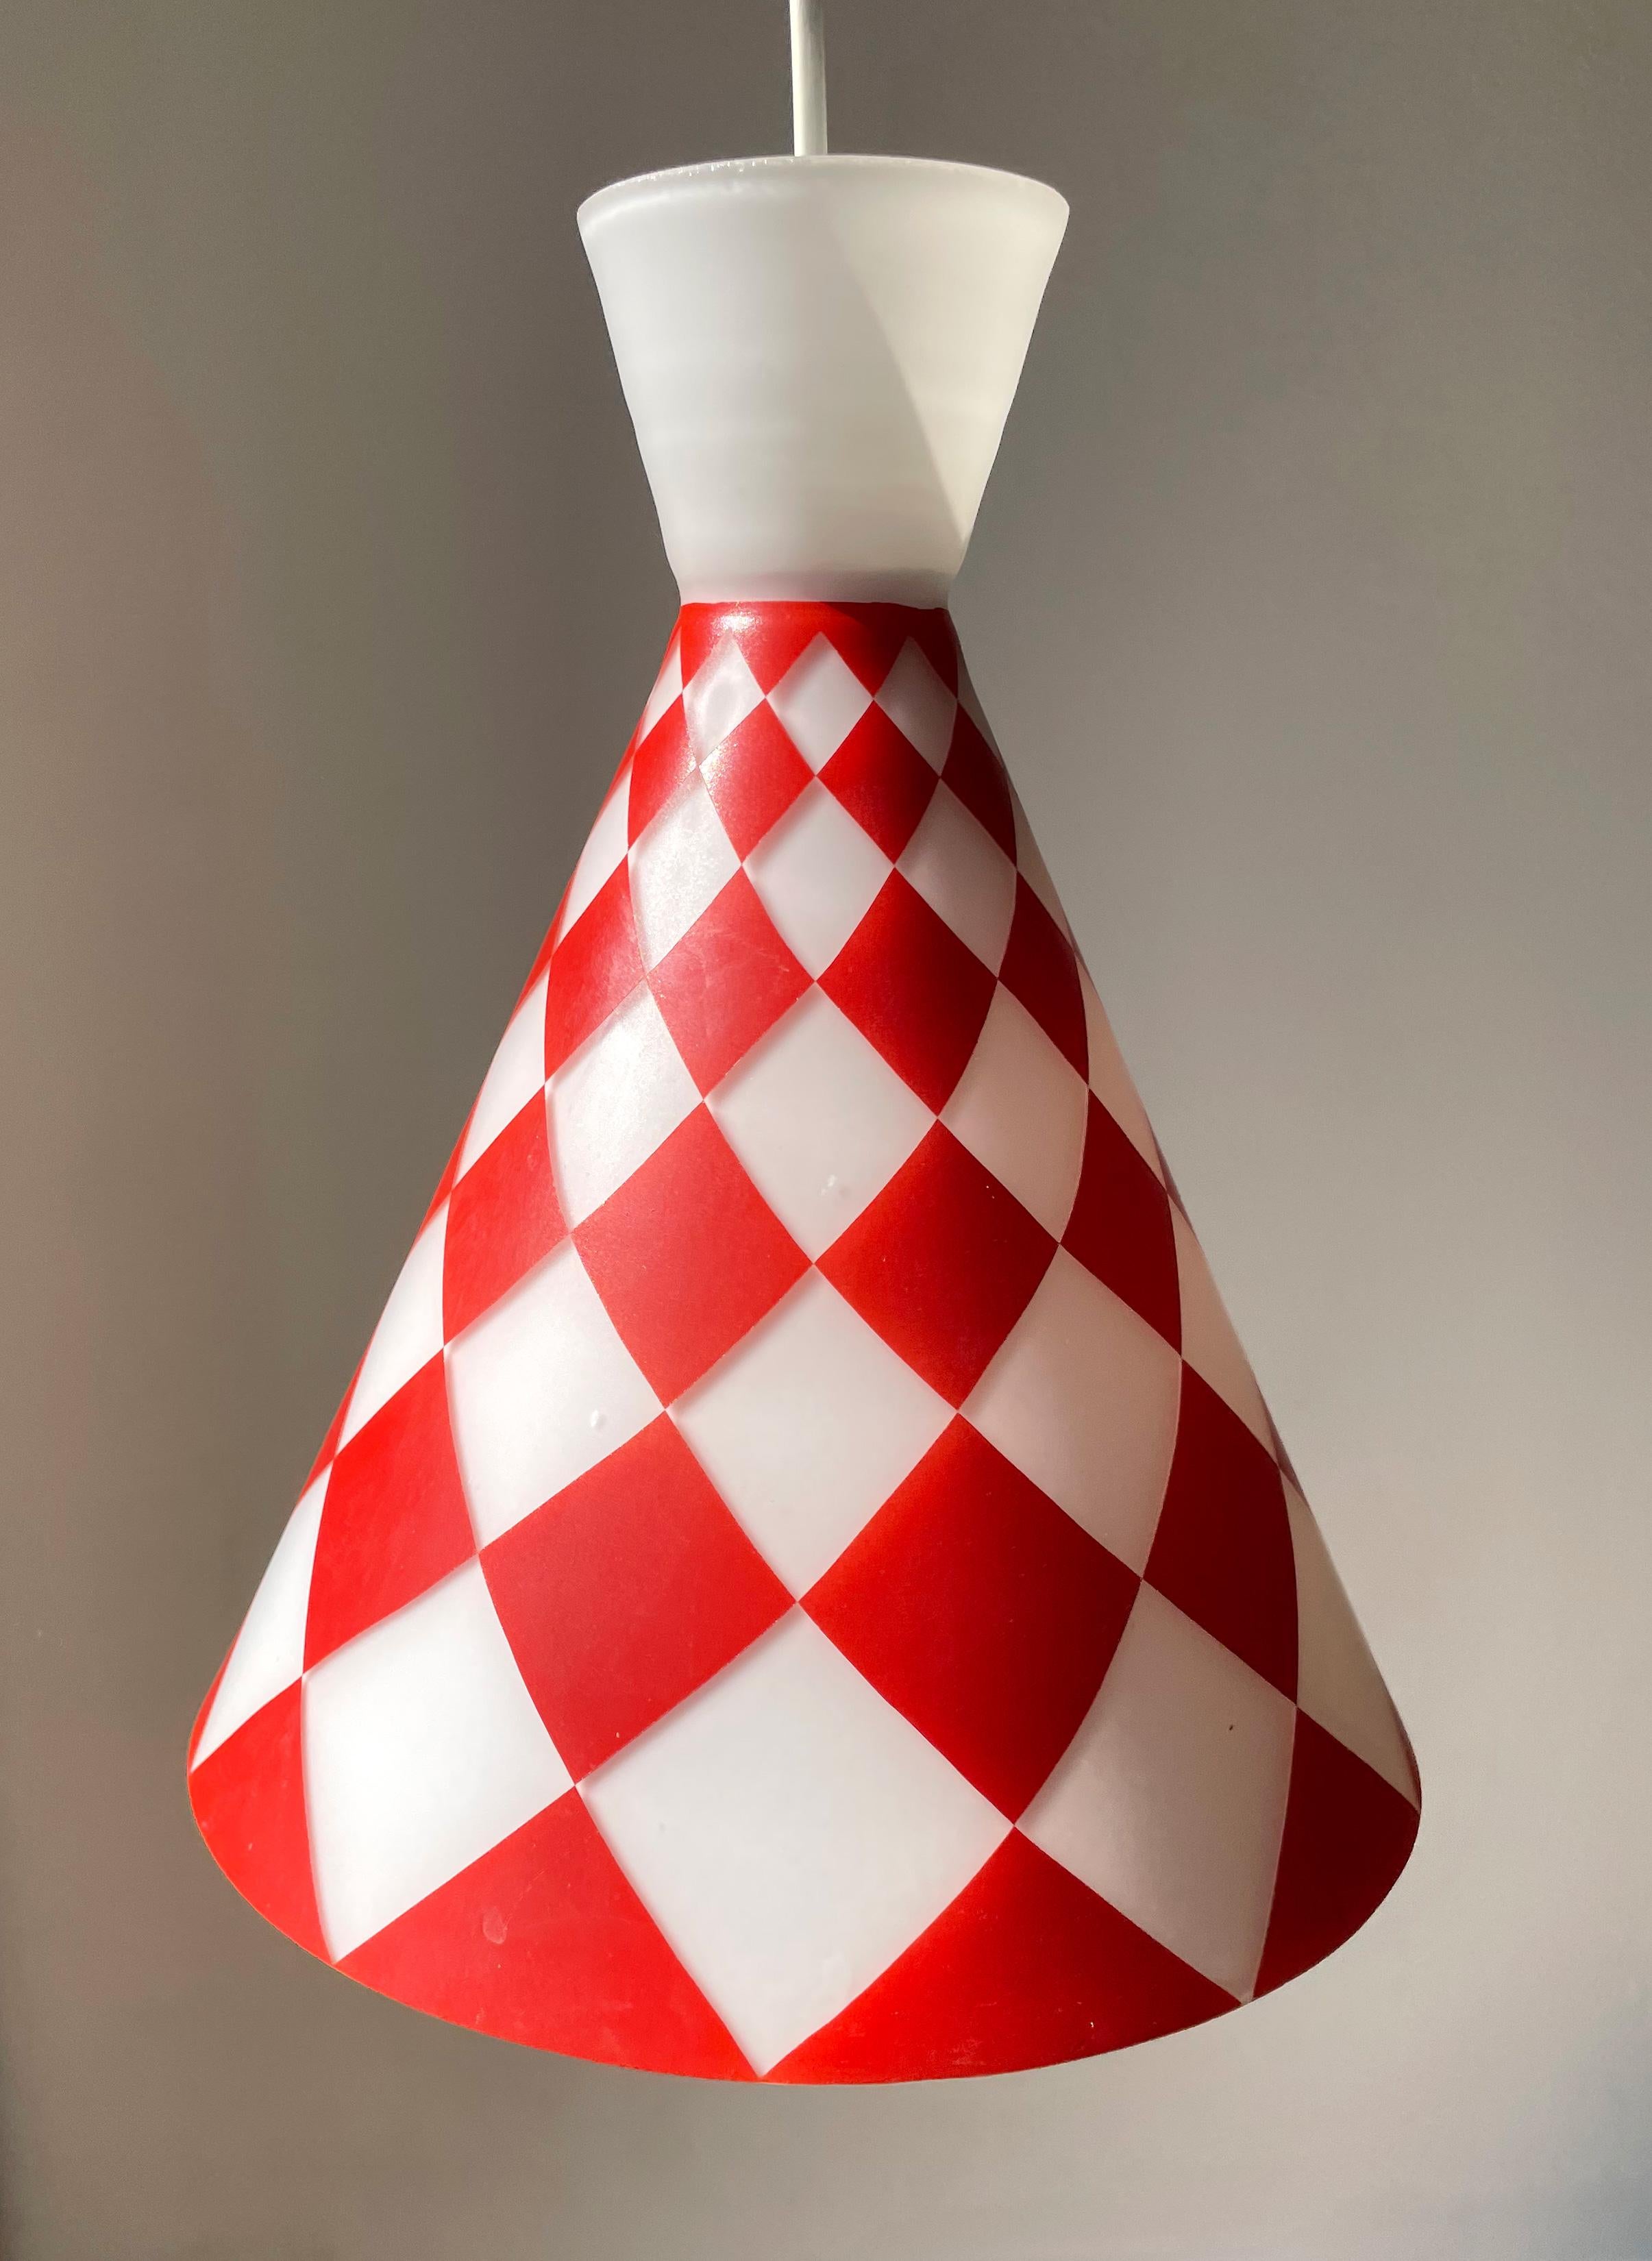 Midcentury European modern cone shaped white opaline glass pendant with bright red rhombus shaped decorations and milky white top. Original plastic canopy. Manufactured in the 1970s. Great vintage condition consistent with age and wear. Local